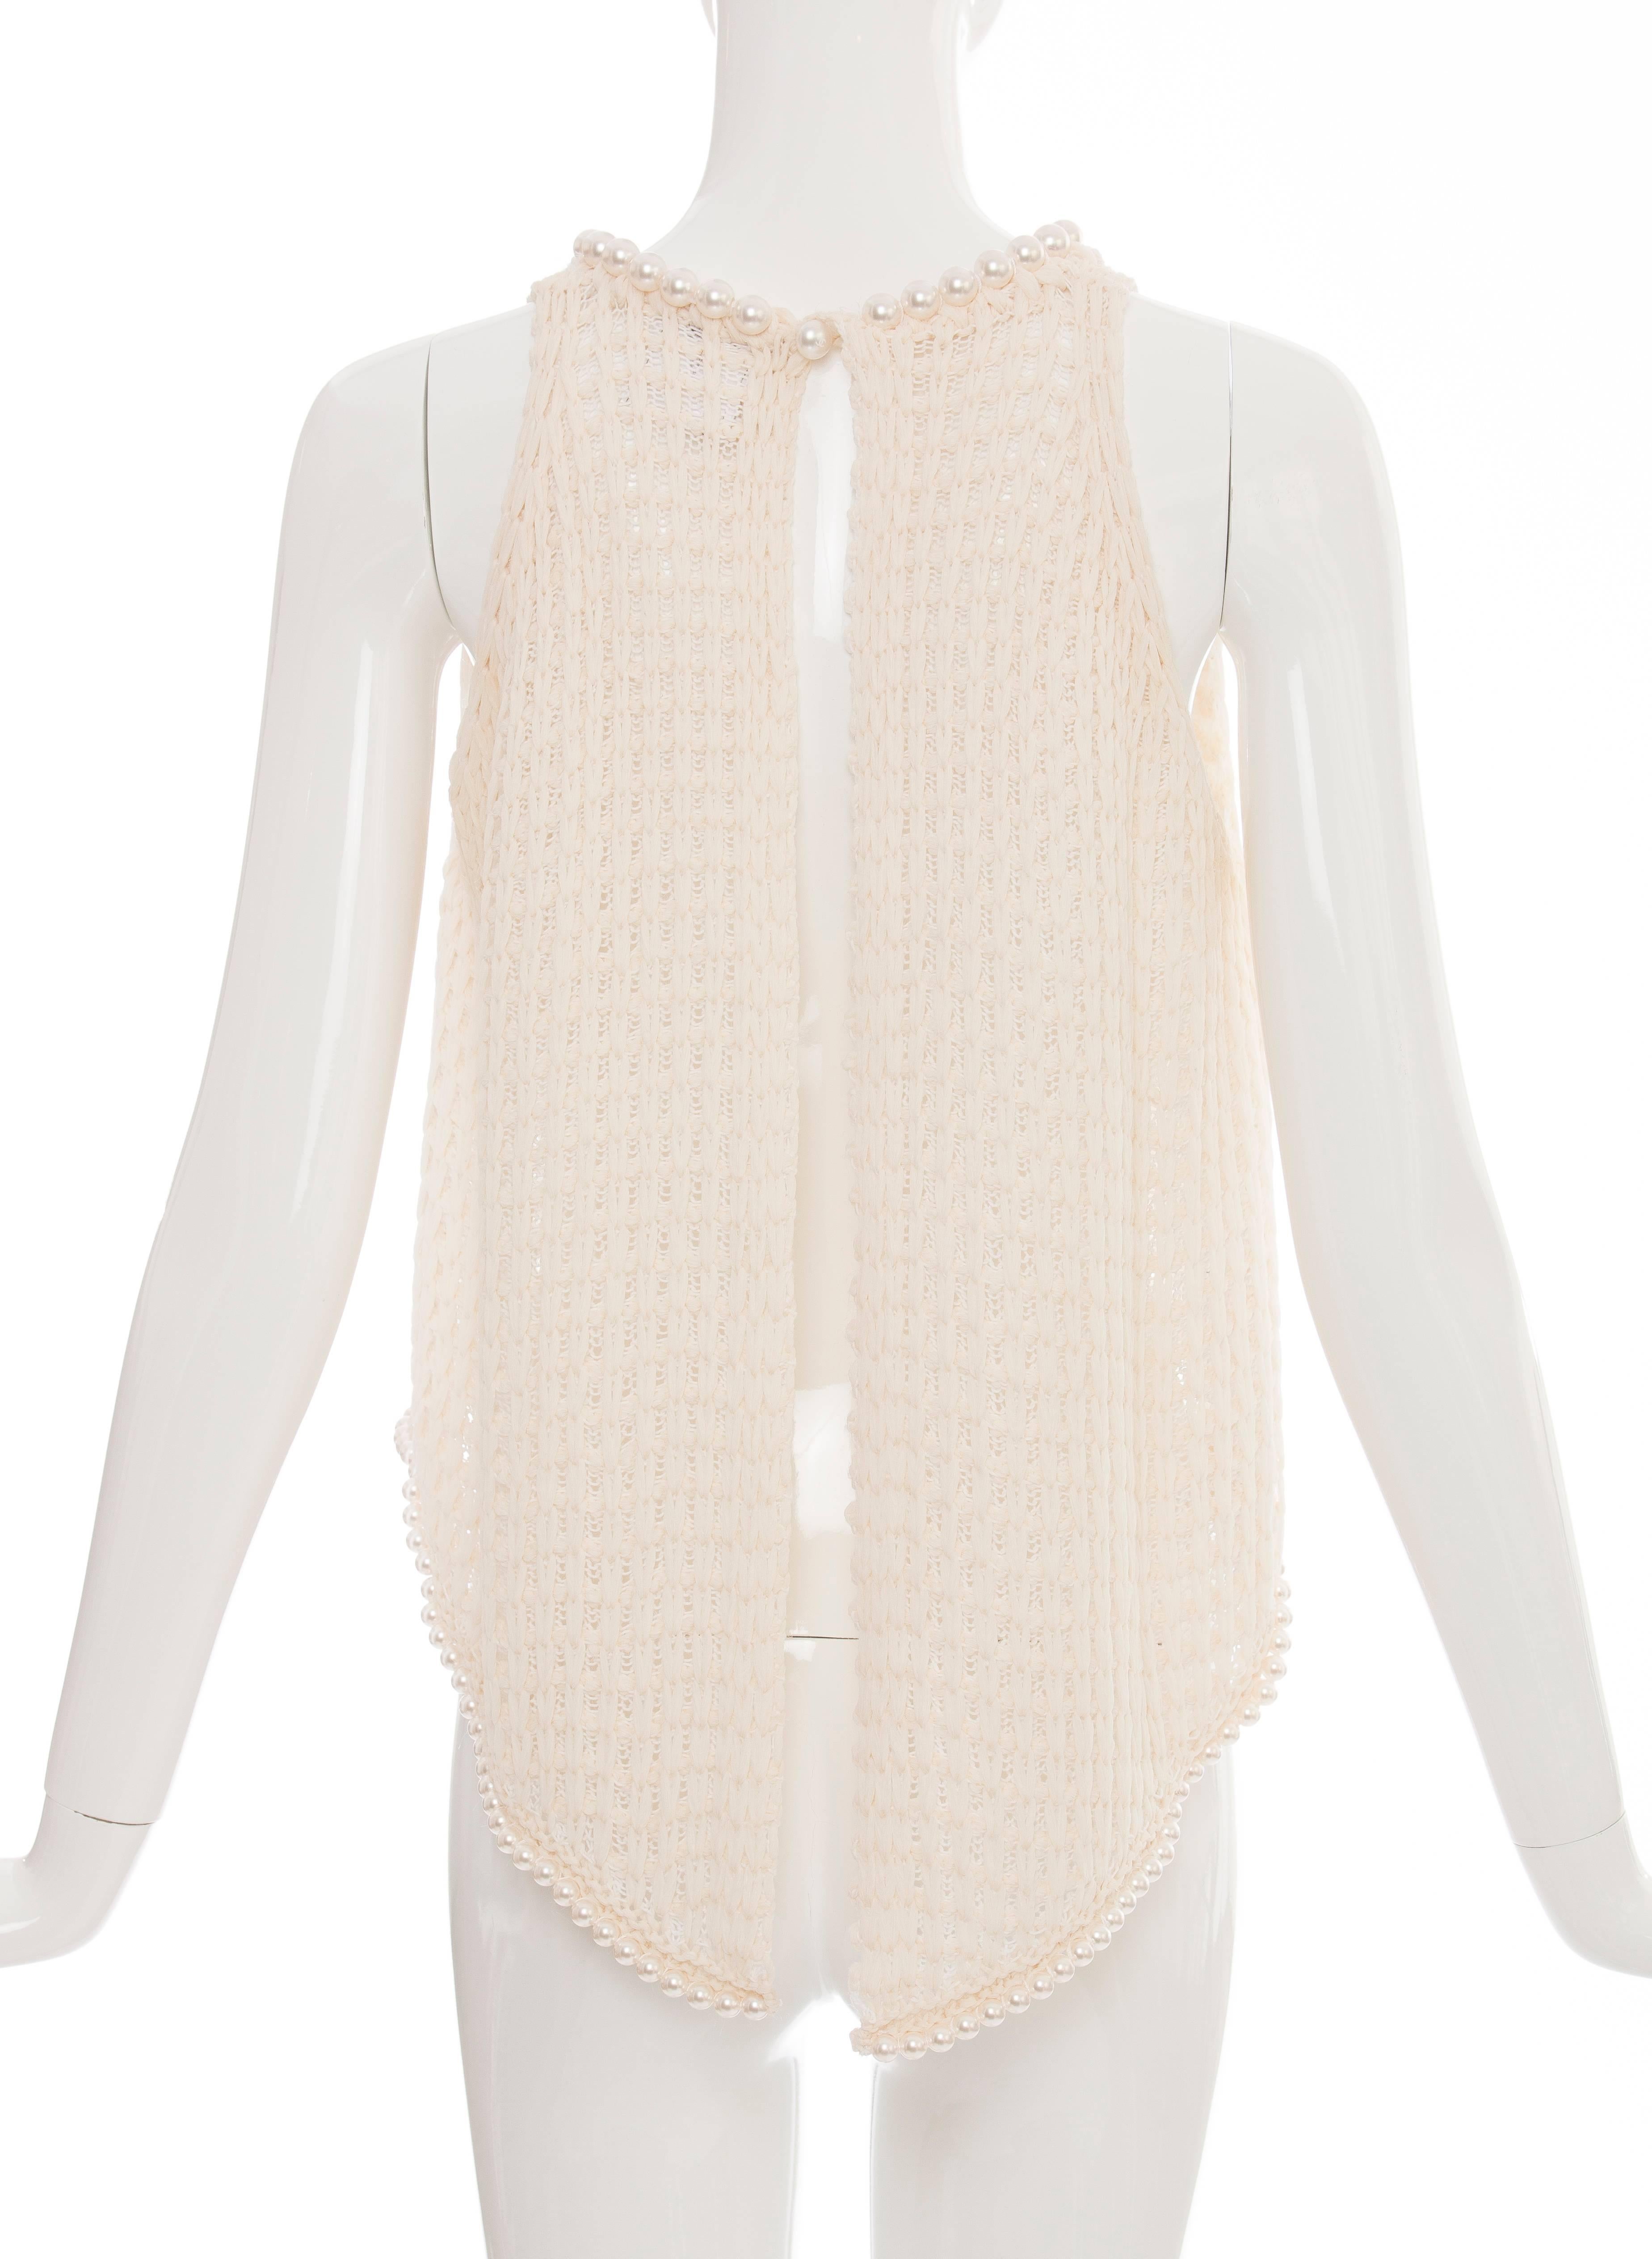 Beige Chanel Cream Silk Blend Open Knit Top With Pearl Embellishments, Spring 2009